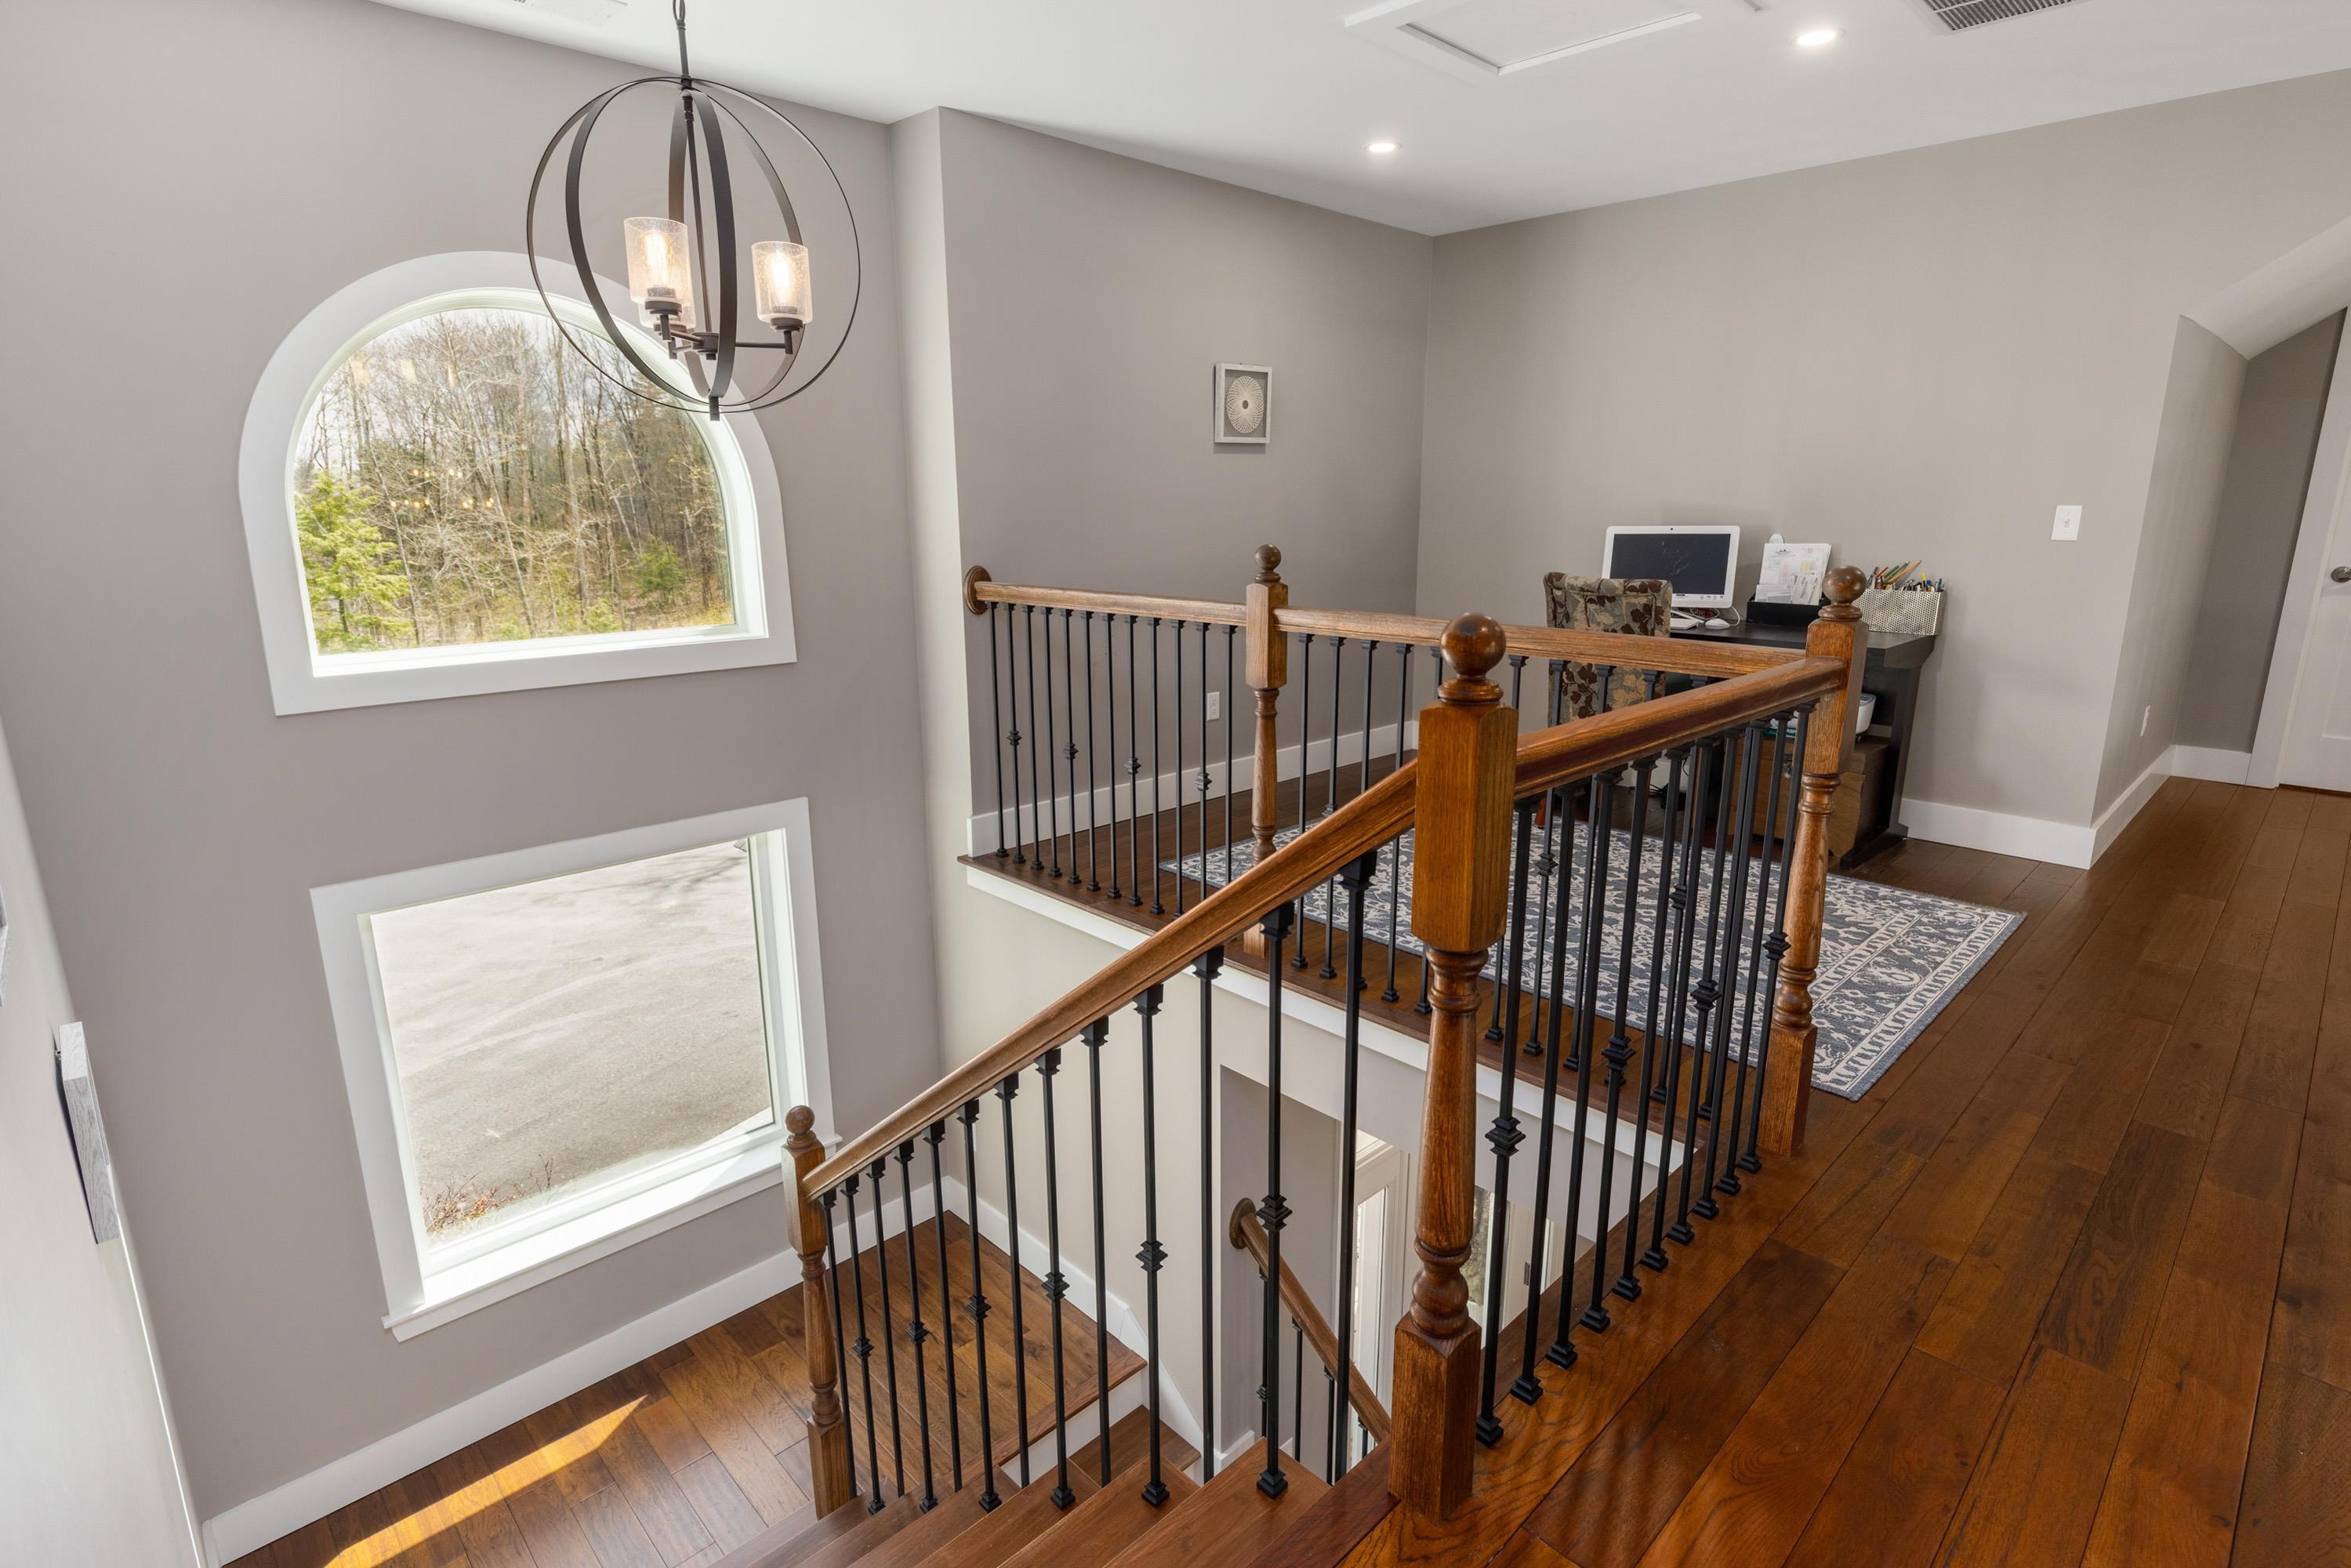 Grand stairway to 2nd level that offers 3 additional bedrooms, 2 baths, 2 storage closets